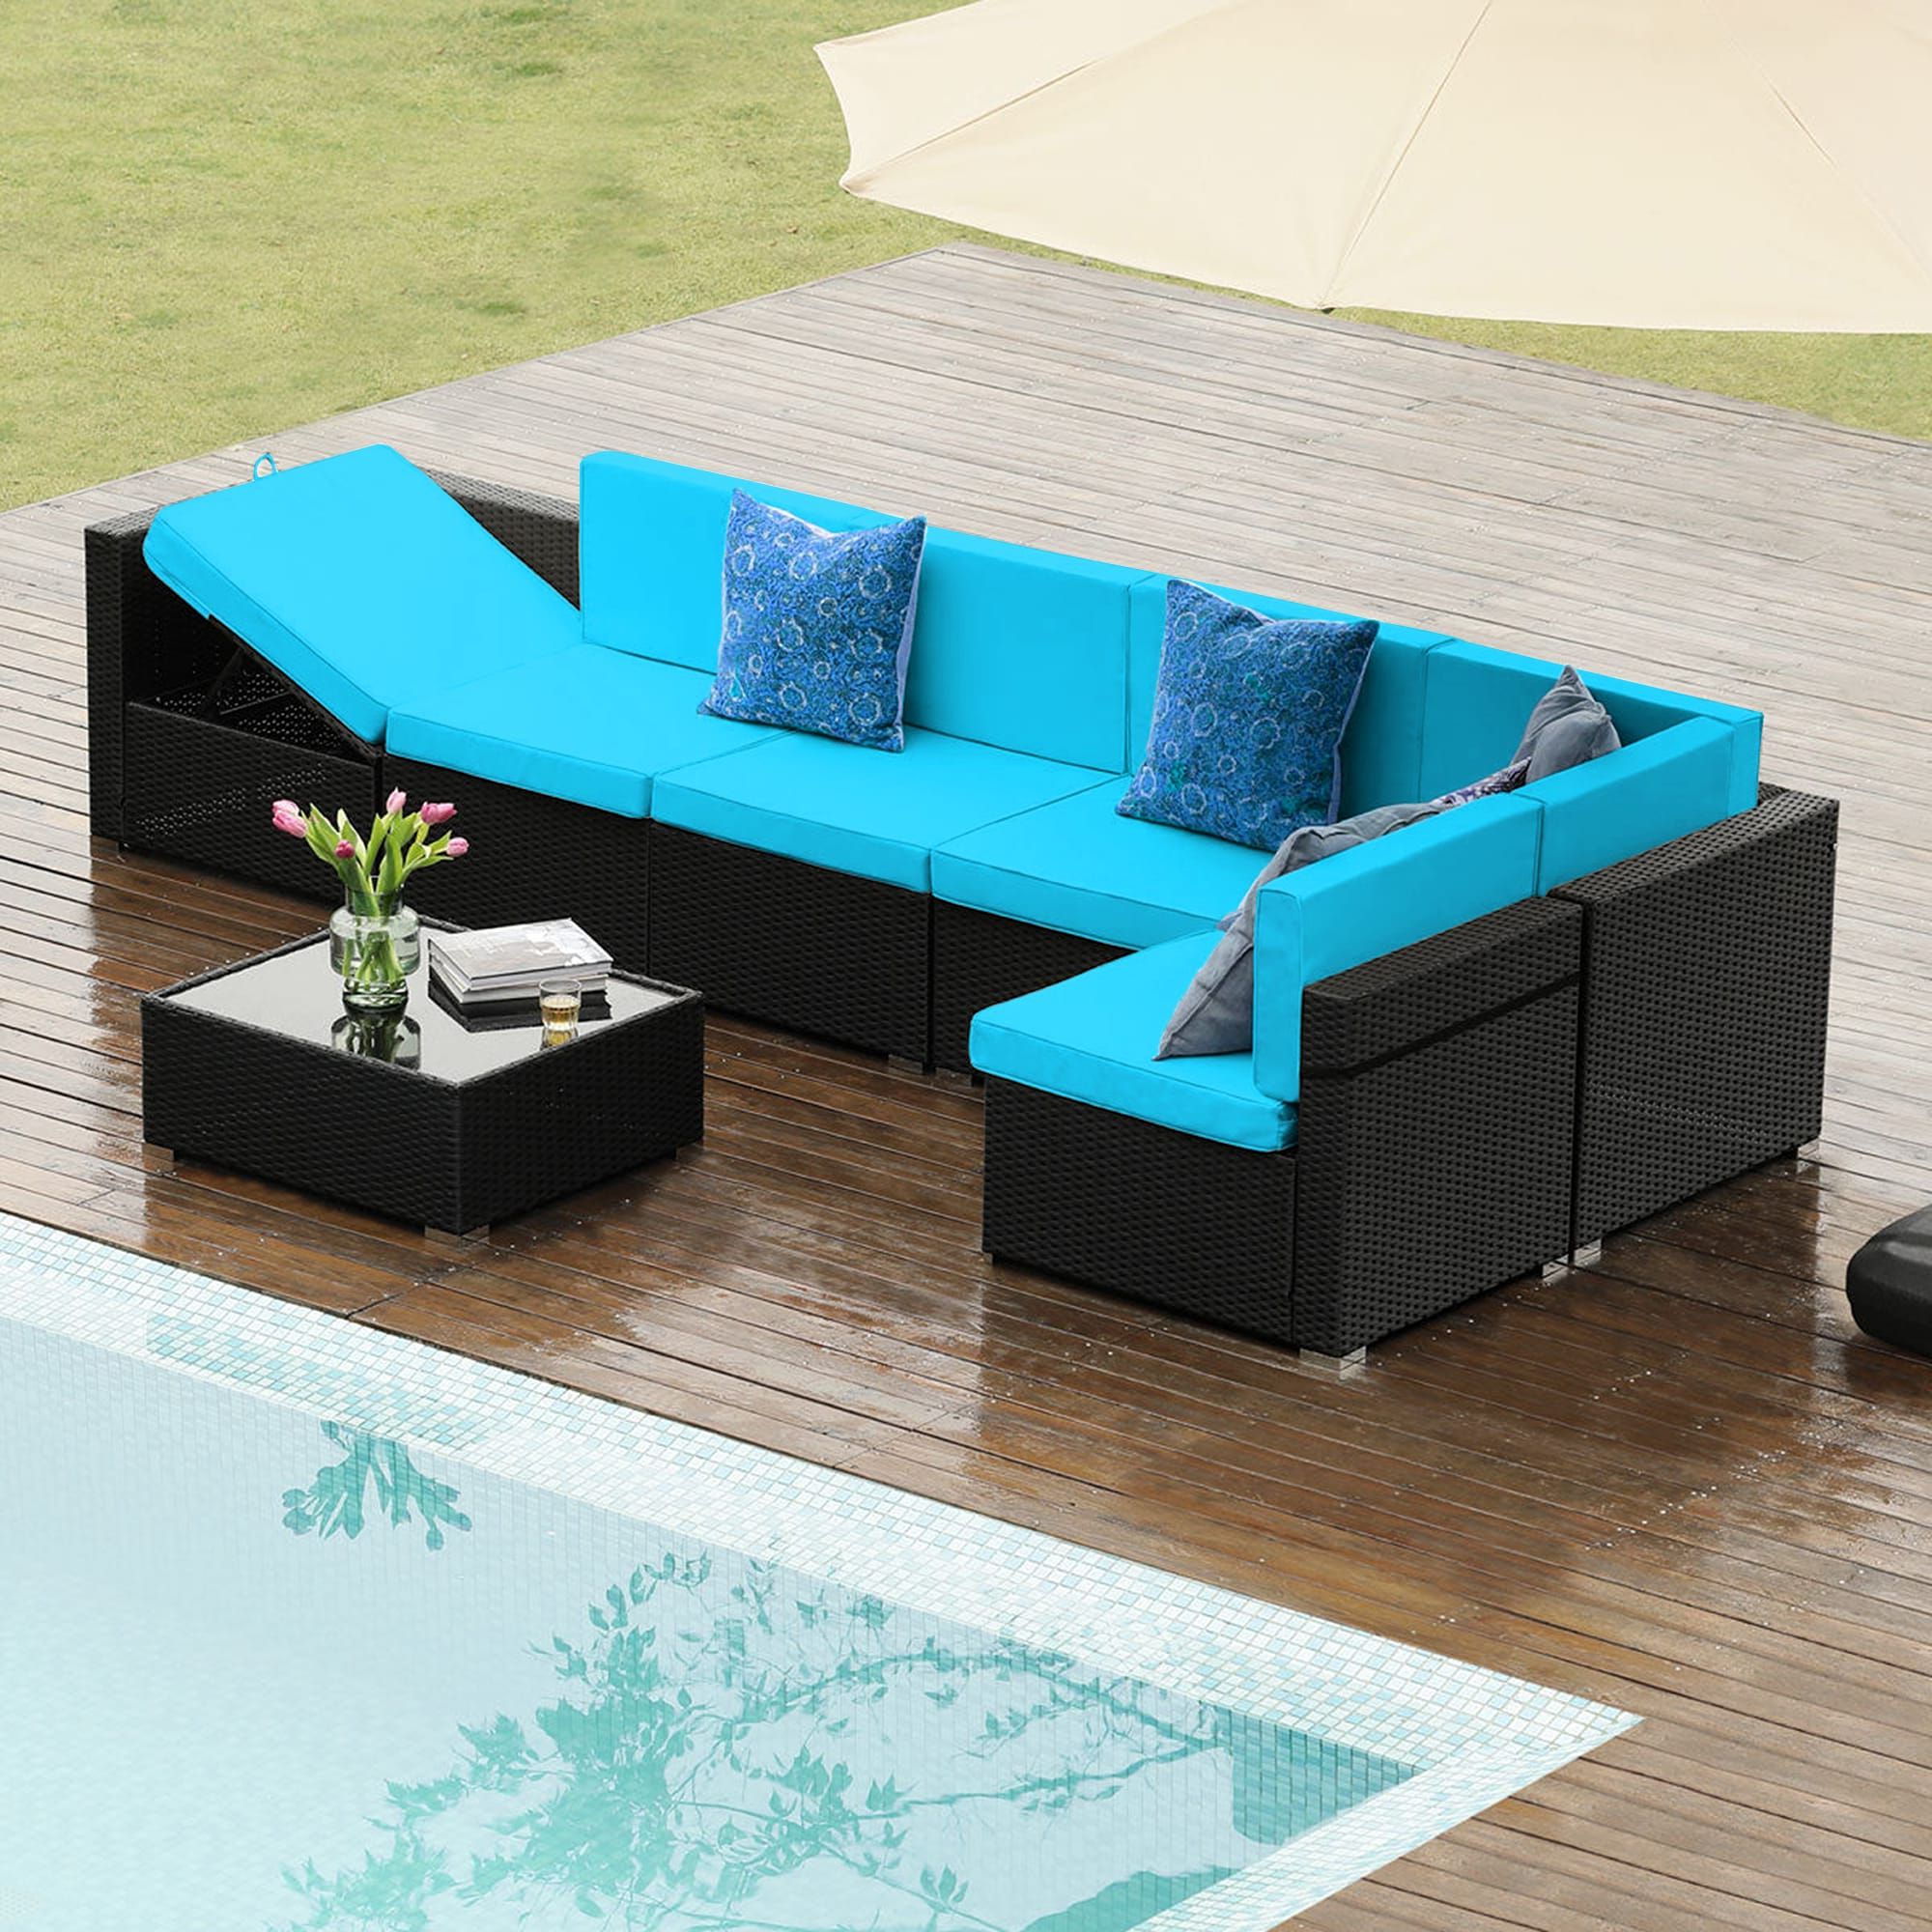 7 Piece Rattan Sectional Sofa Set For Most Up To Date 7  Piece Patio Conversation Set Rattan Outdoor Sectional With Blue  Cushion(s) And Iron Frame In The Patio Sectionals & Sofas Department At  Lowes (View 9 of 15)